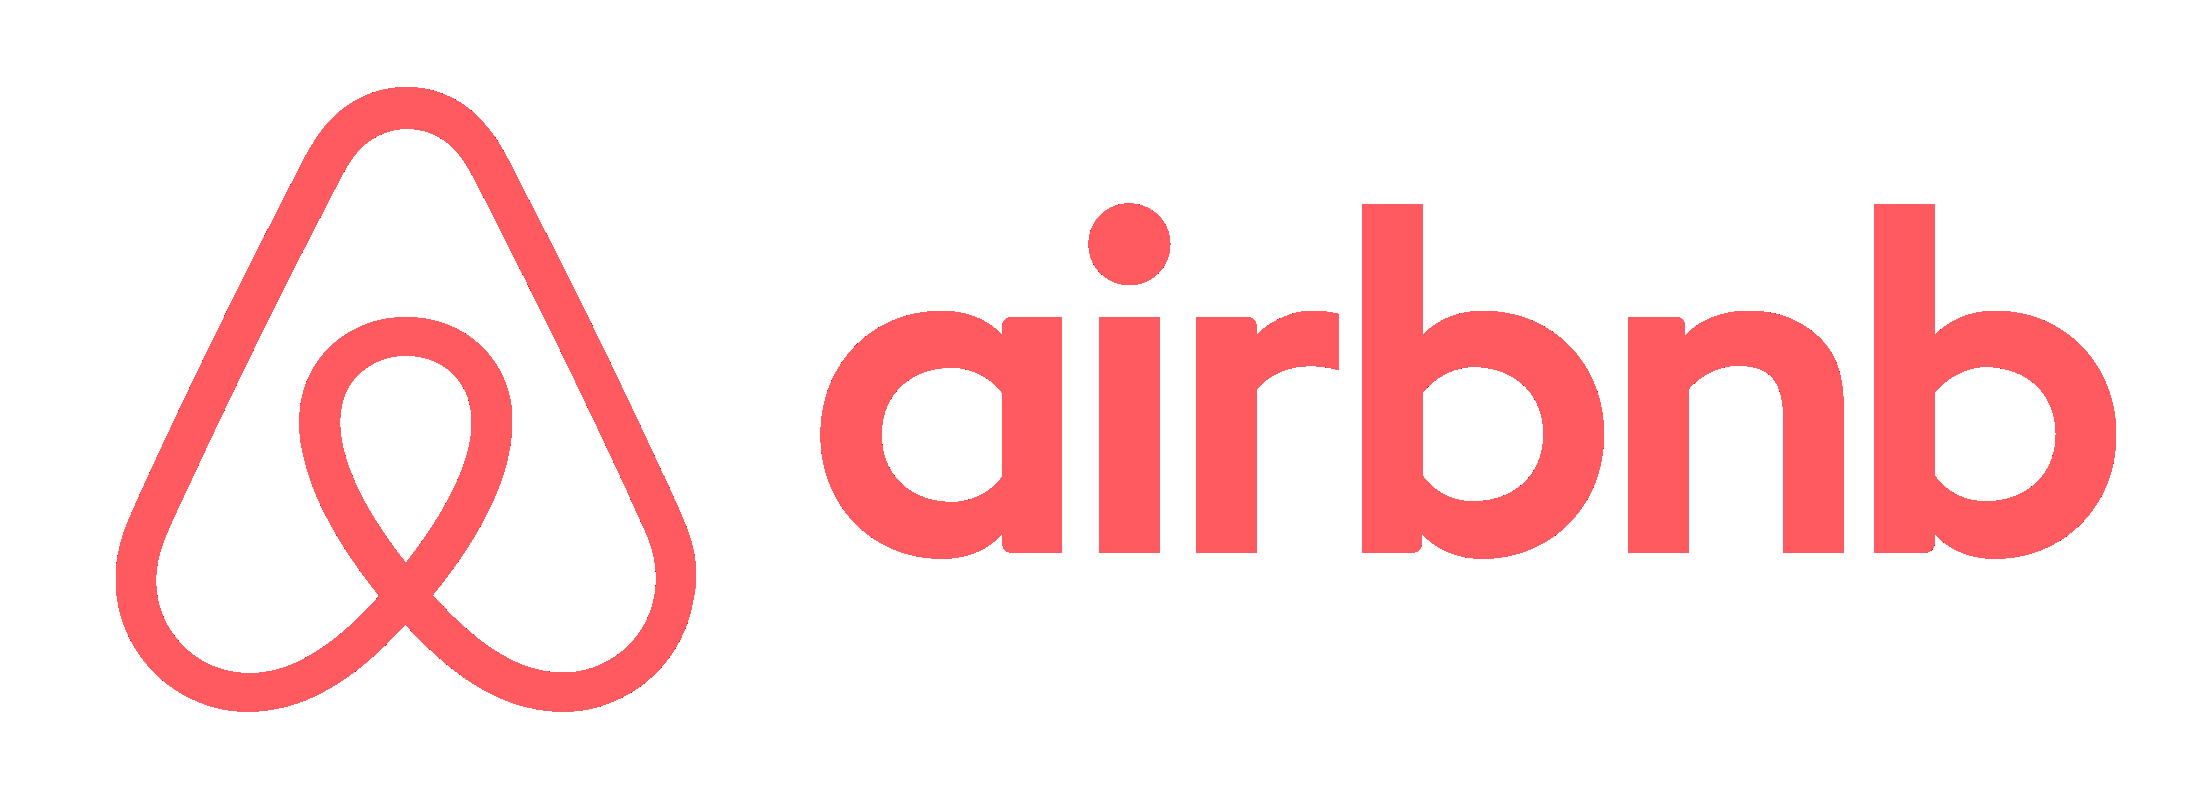 Airbnb-Logo.png